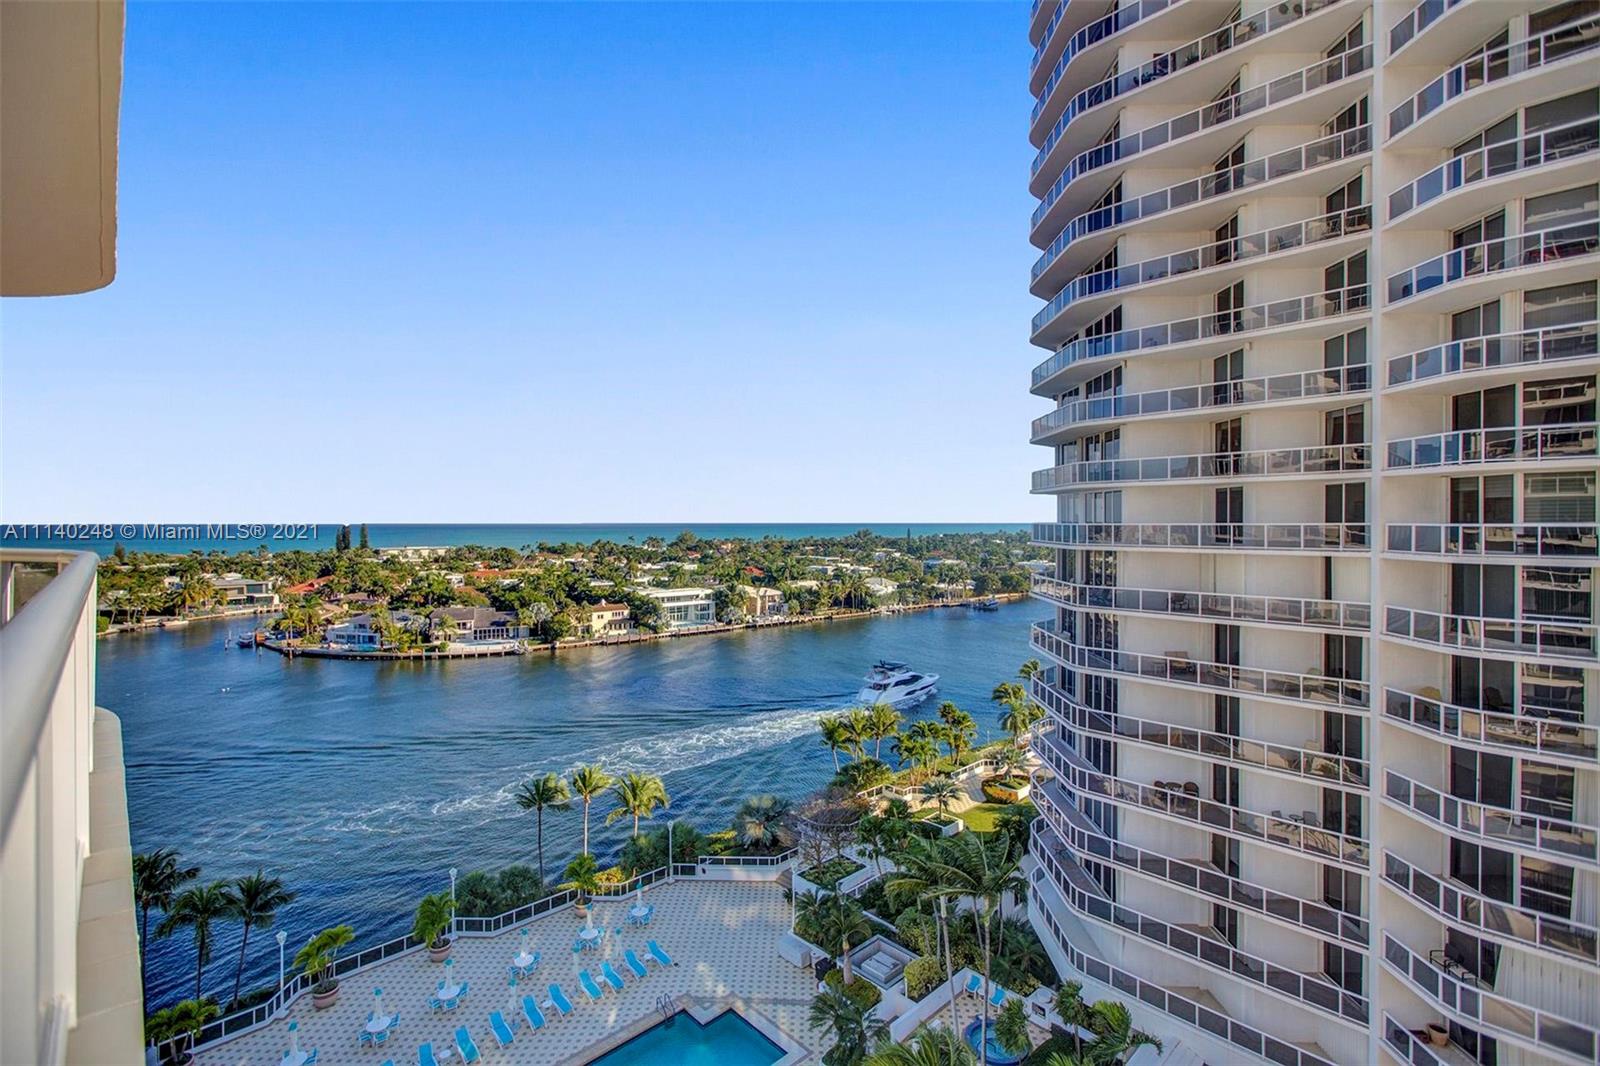 Great unit in the desirable One Island Place complex offers 2 bedrooms 3 bathrooms and a den with 2,240 sq.ft. Private elevator takes you directly into the unit. The spacious living and dining room offer amazing views of the ocean. This unit offers spectacular views of the ocean, intracoastal waterways marina from 2 balconies. Building has great amenities, spa, remodeled gym, tennis courts, private treatment room, snack bar on weekends, 2 swimming pools, walking distance to Waterways shops and Aventura mall and A+ elementary, middle and high schools. Please allow 24 hours for showings.